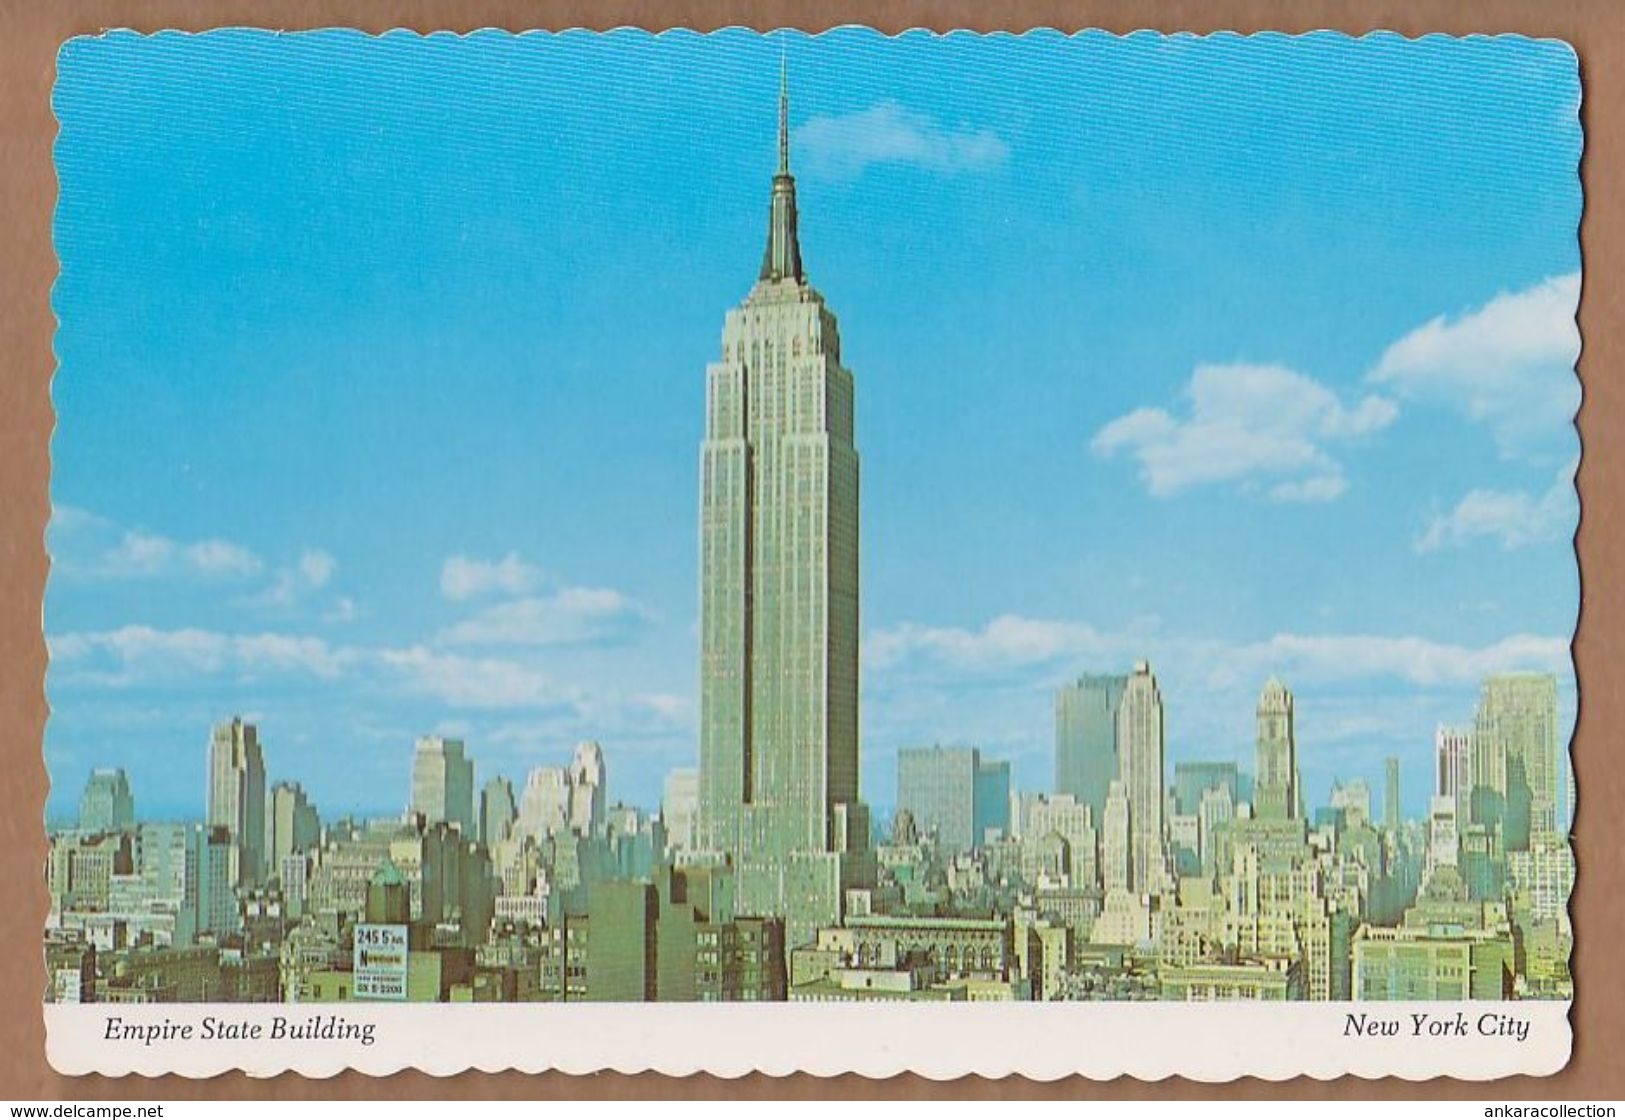 AC - EMPIRE STATE BUILDING NEW YORK CITY UNITED STATES OF AMERICA CARTE POSTALE  POST CARD - Multi-vues, Vues Panoramiques